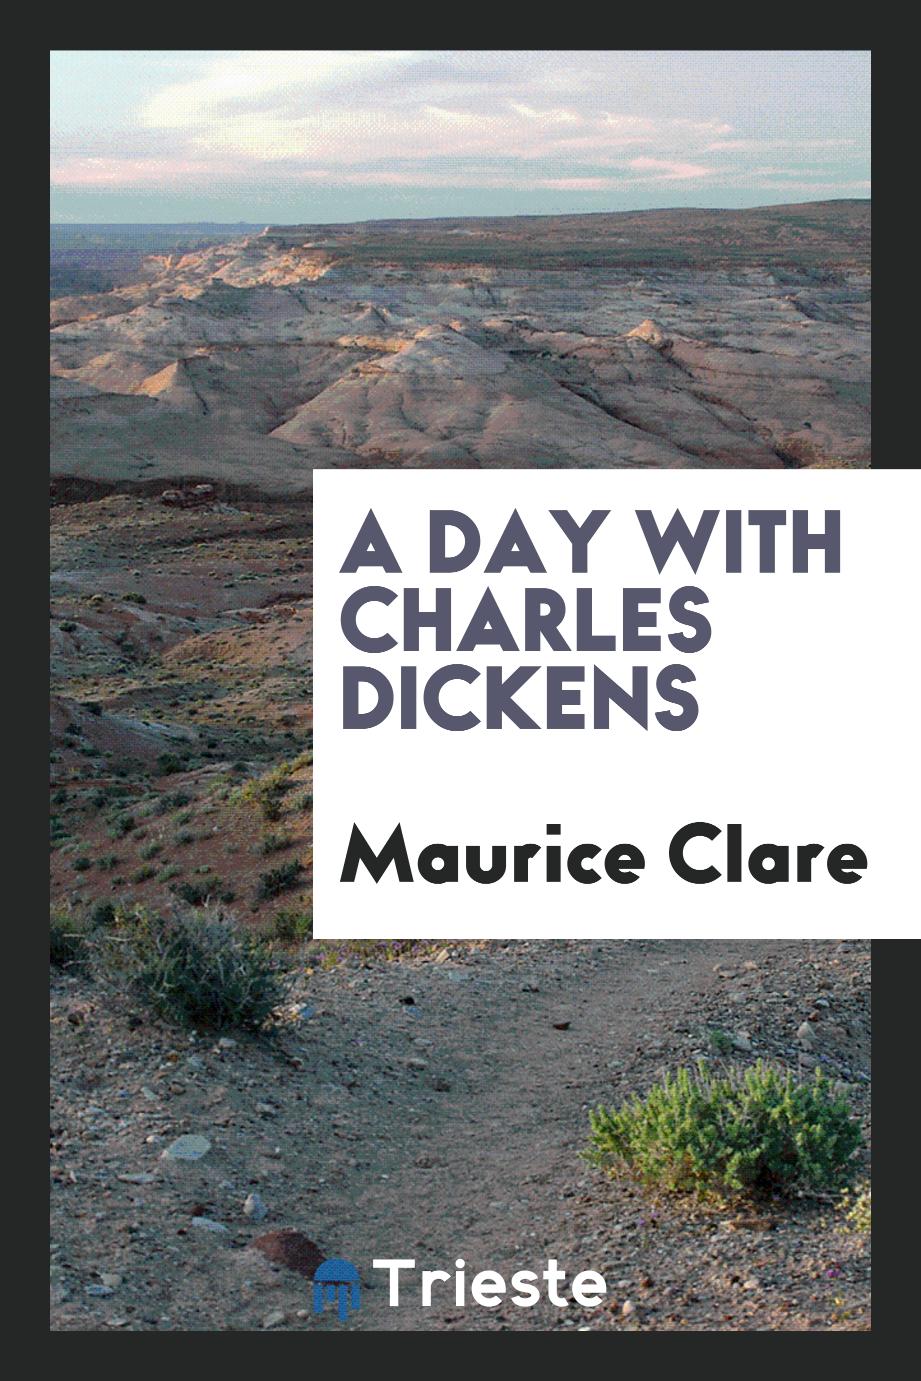 A day with Charles Dickens